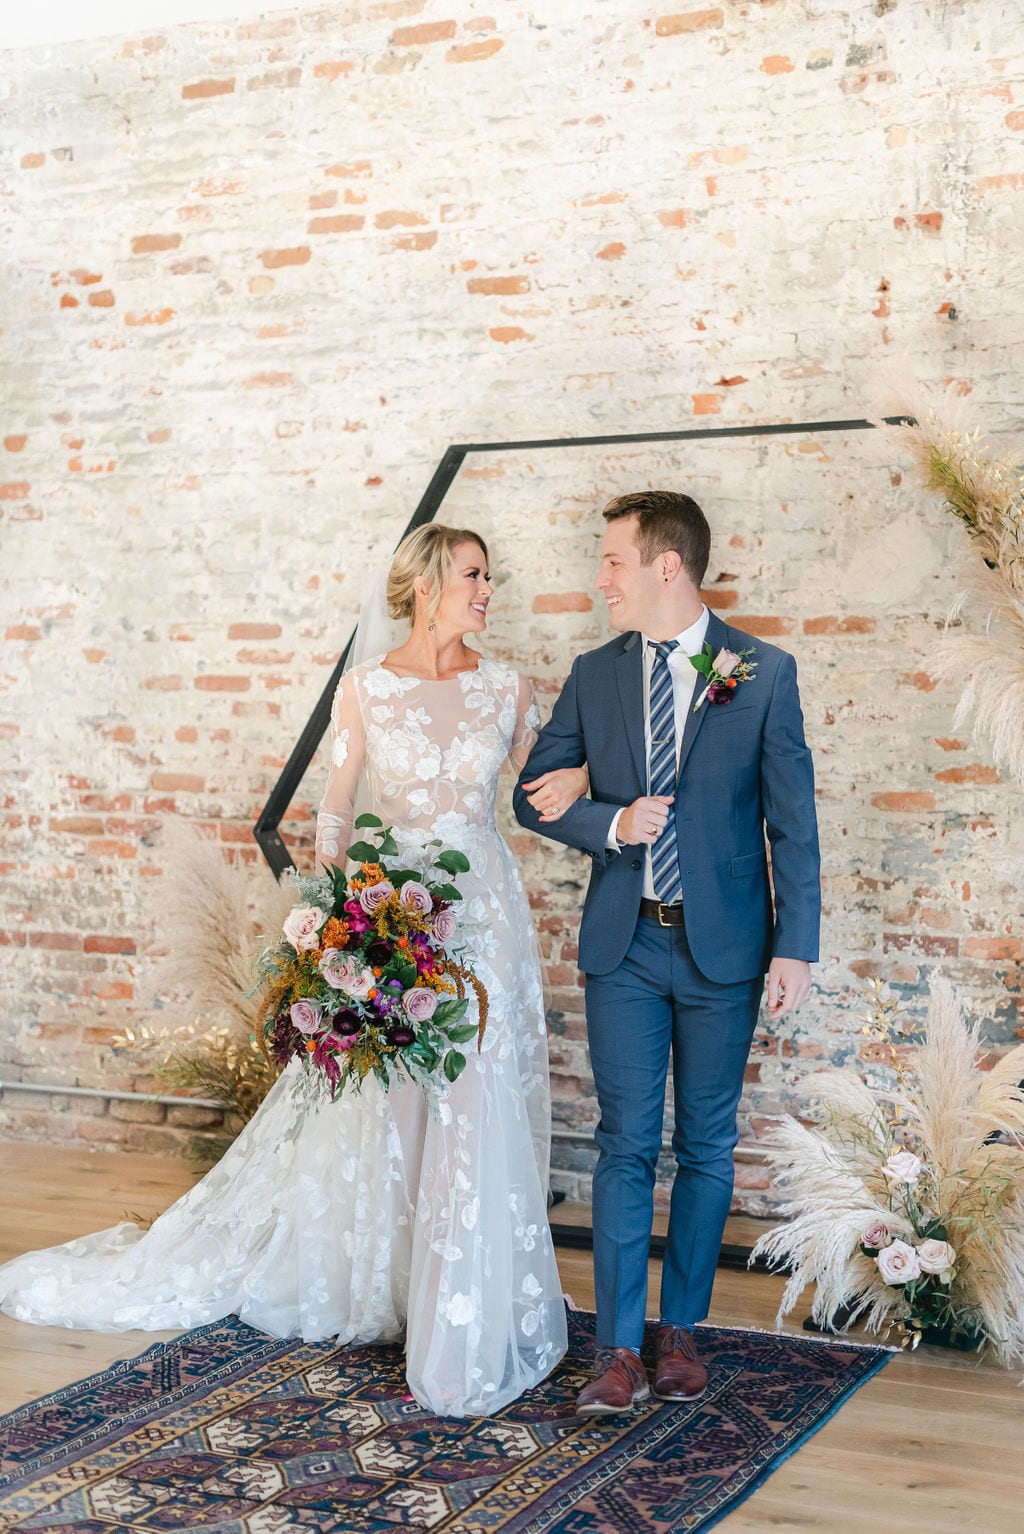 Bride and groom smiling at each other after they sealed their first kiss at their wedding ceremony. The backdrop is exposed brick with an octagonal ceremony arbor.